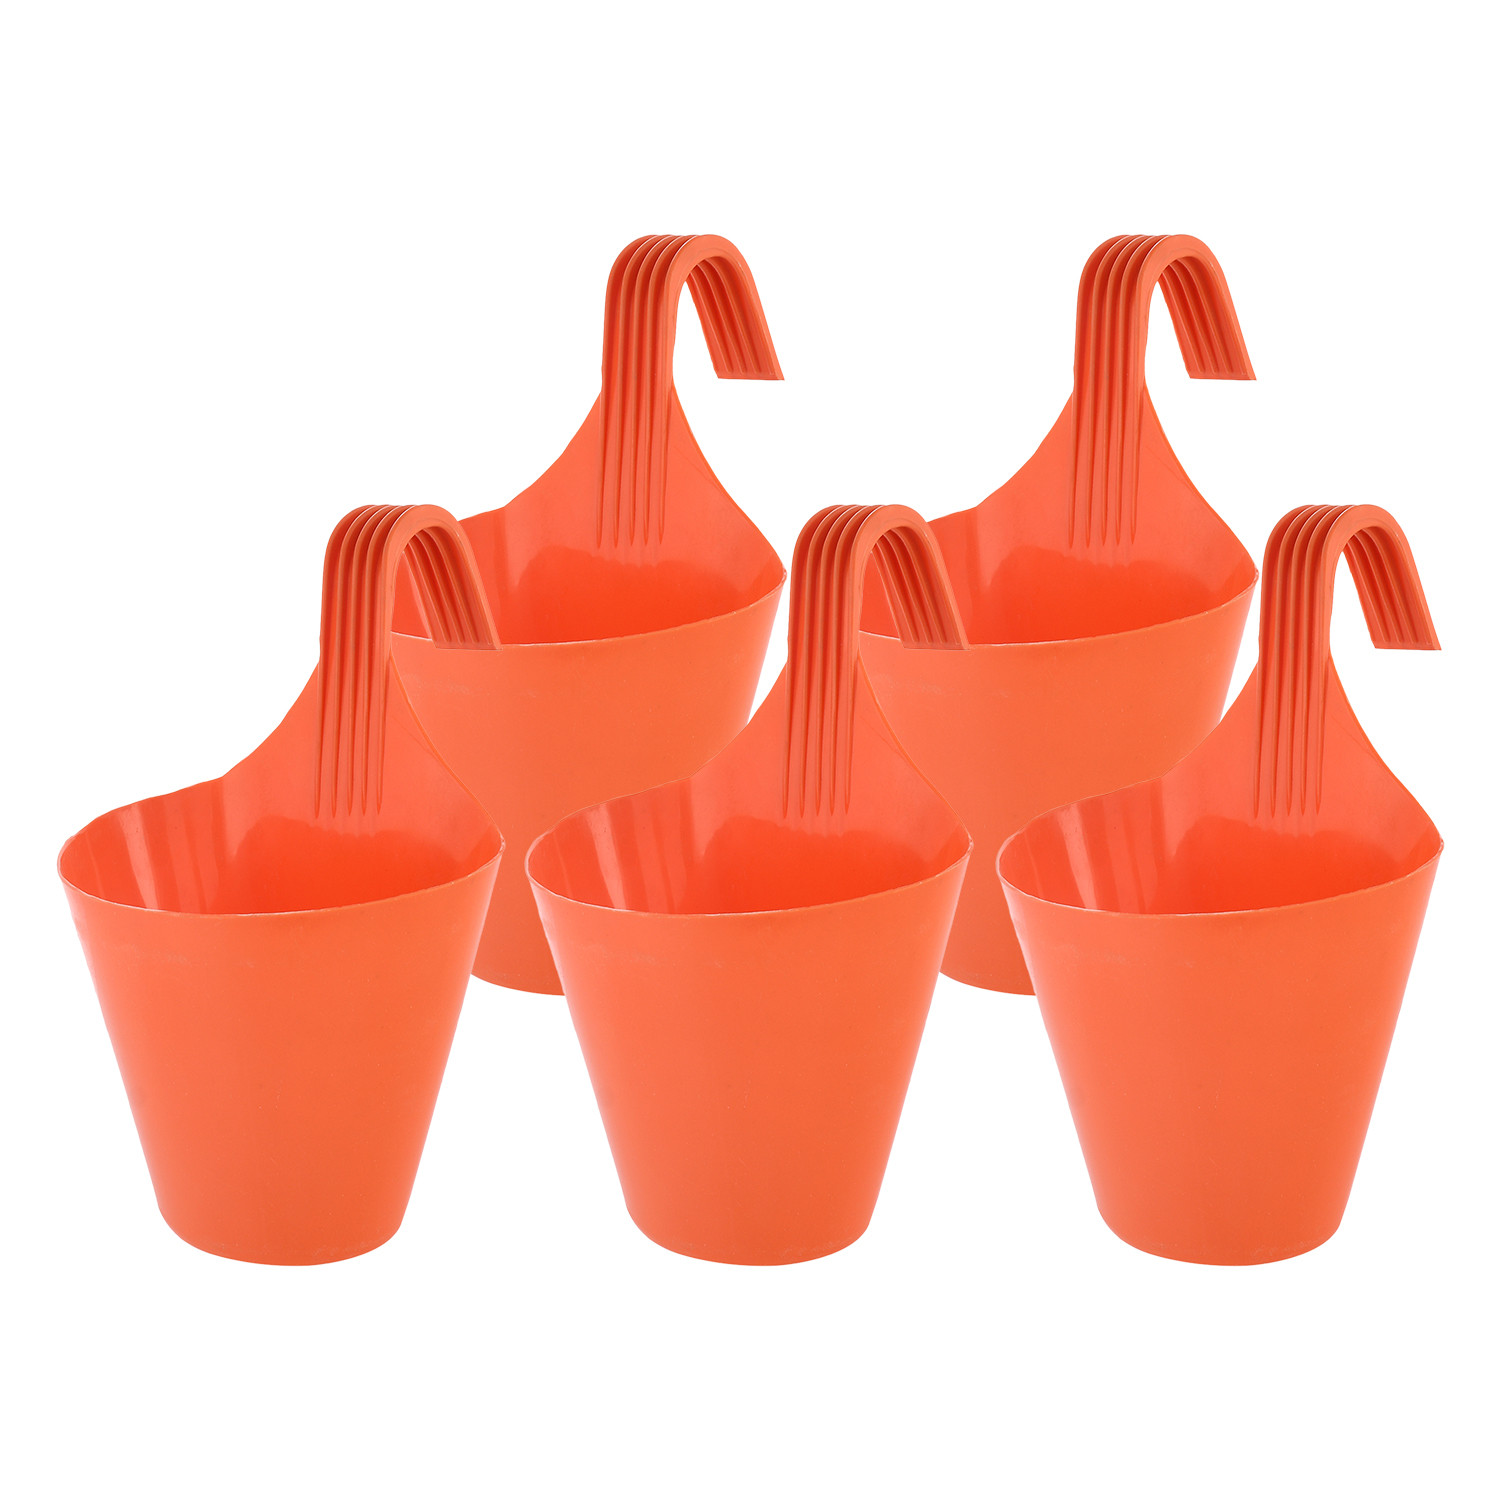 Kuber Industries Hanging Flower Pot|Single Hook Plant Container|Durable Plastic Glossy Finish Pots for Home|Balcony|Garden|9 Inch|(Orange)